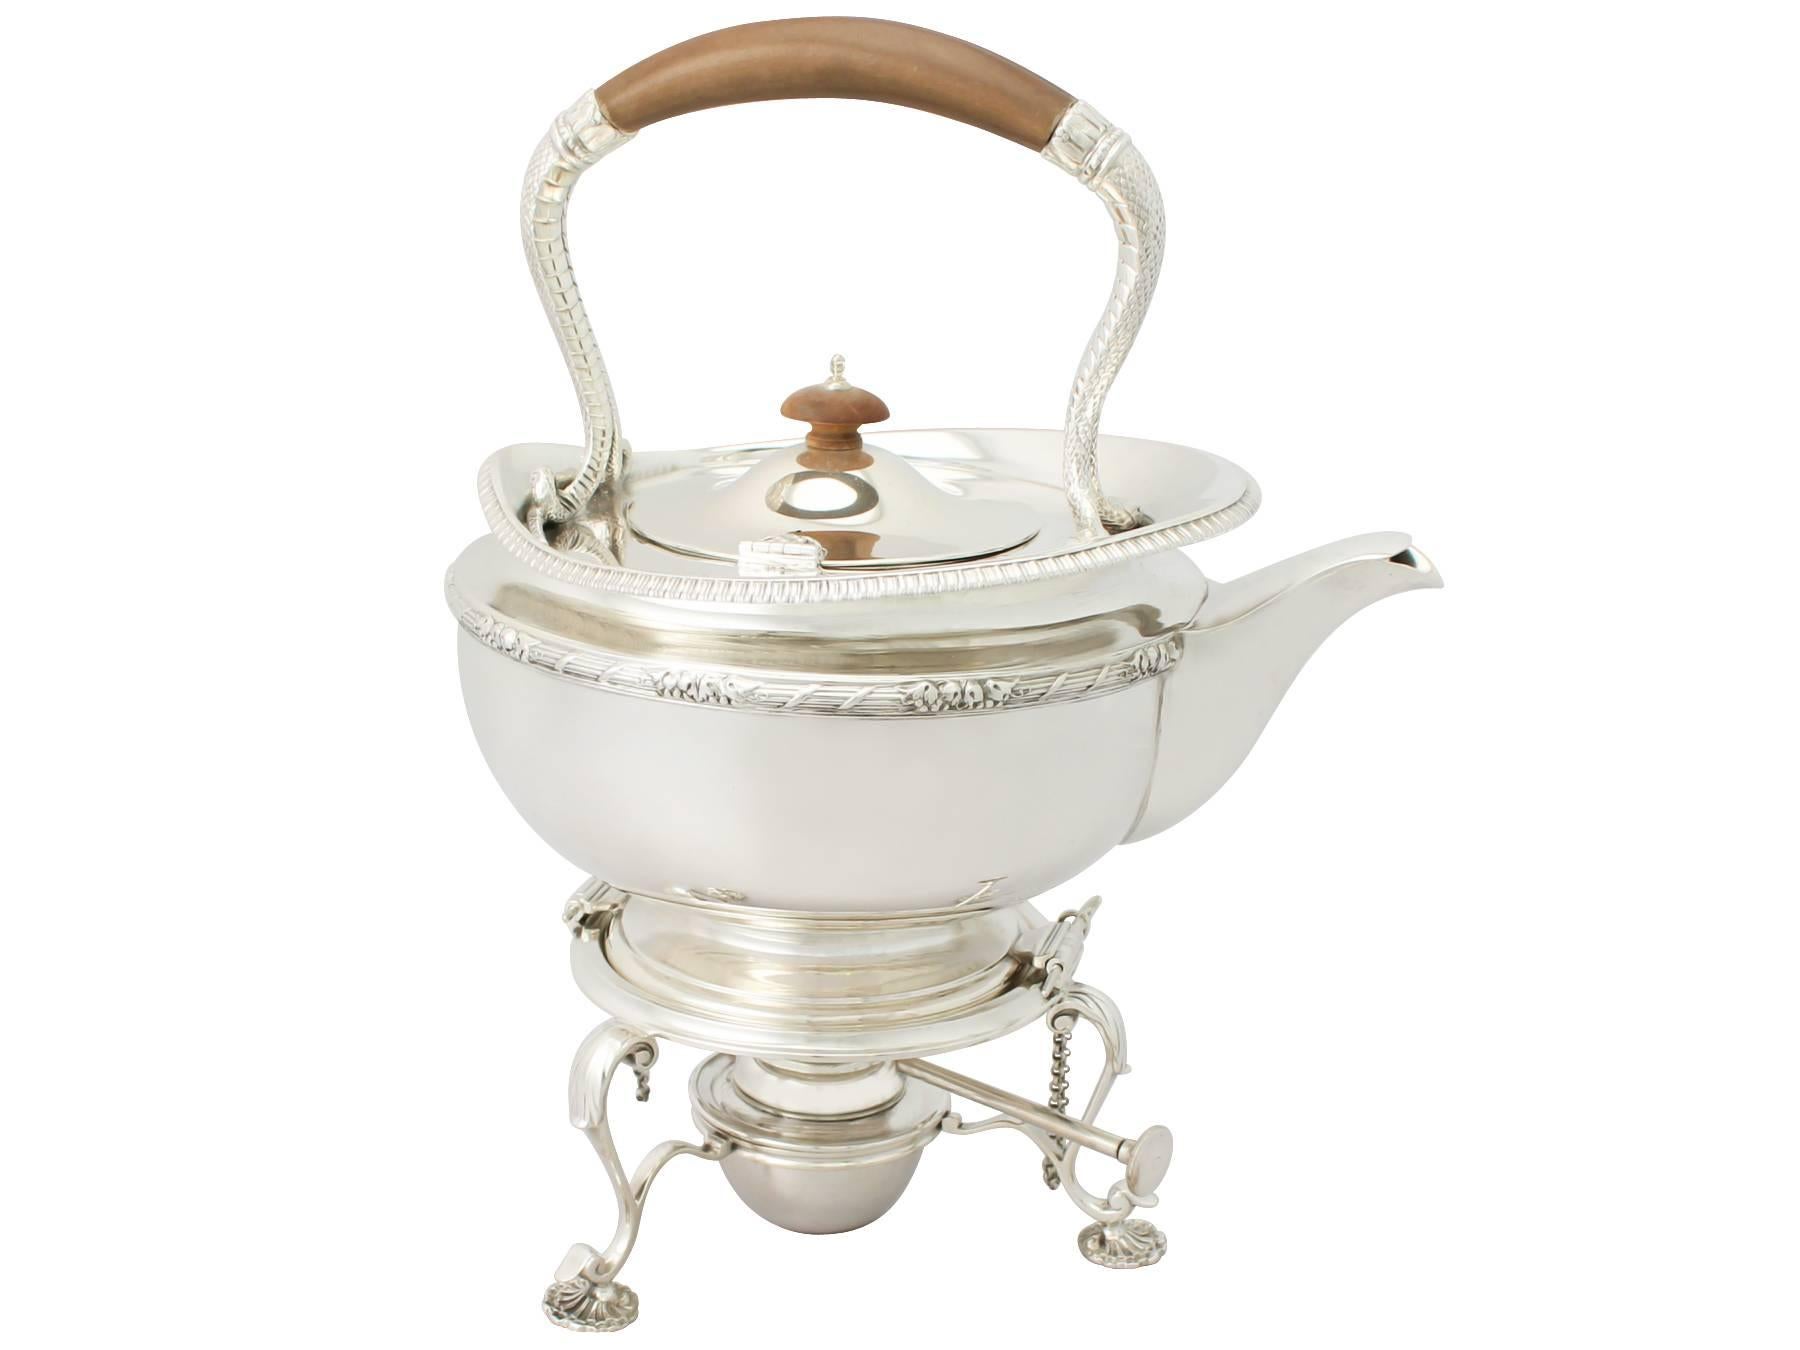 A  exceptional, fine and impressive antique George V English sterling silver four piece tea service / set; part of our silver teaware collection.

The pieces of this exceptional antique sterling silver four piece tea service consists of a spirit